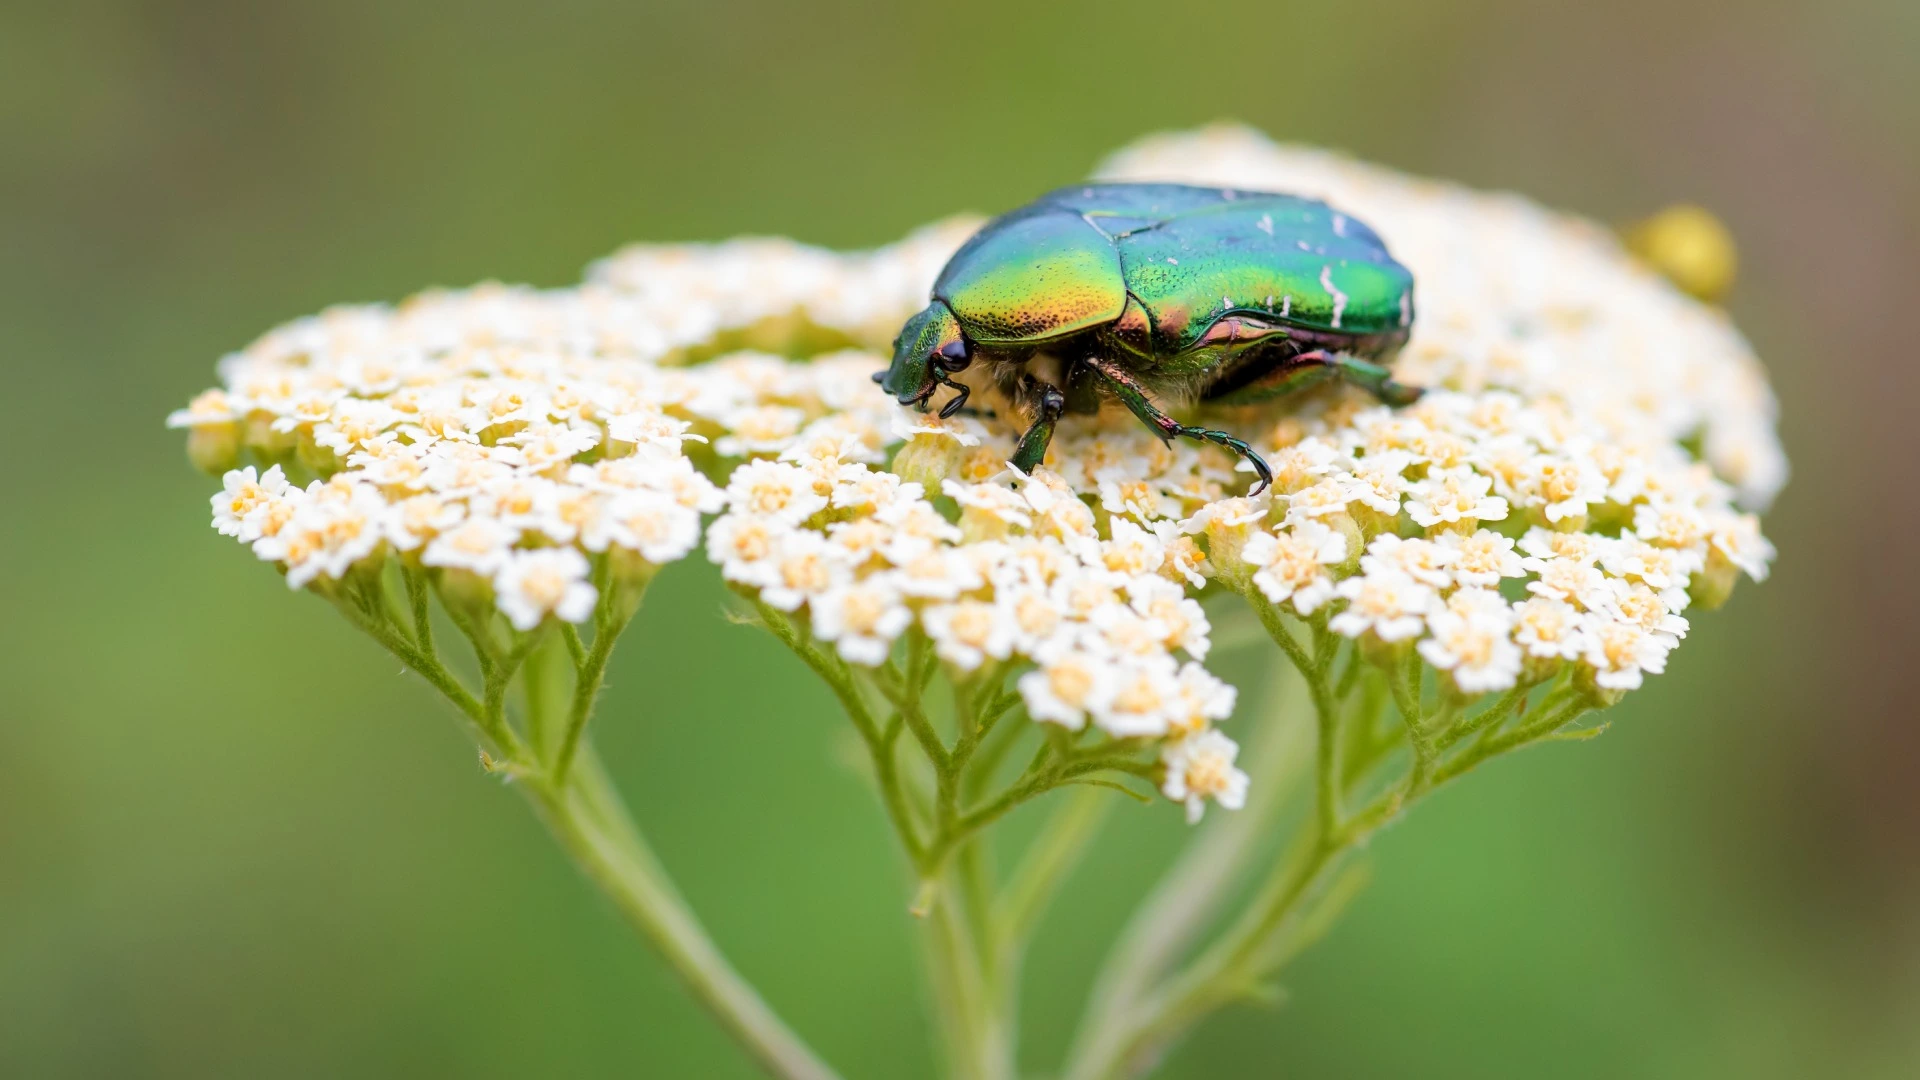 European Chafer Season Is Here - Take Action Now to Prevent Lawn Damage!